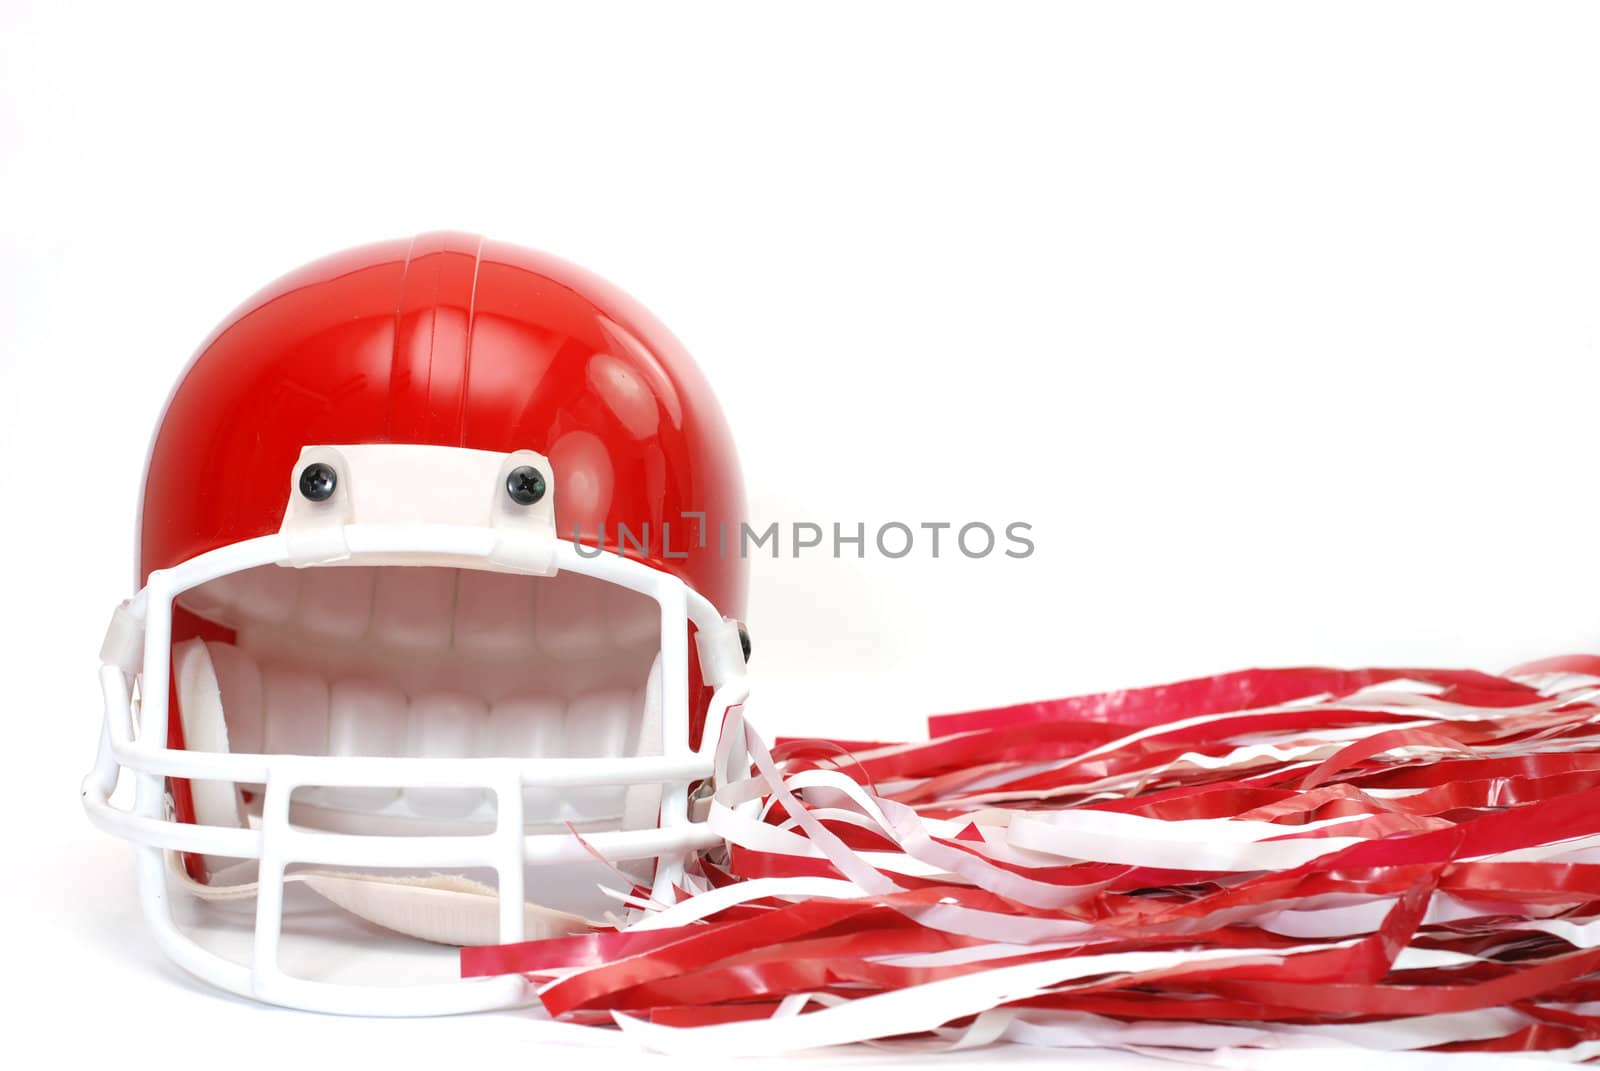 Red football helmet and pom poms isolated on white background.